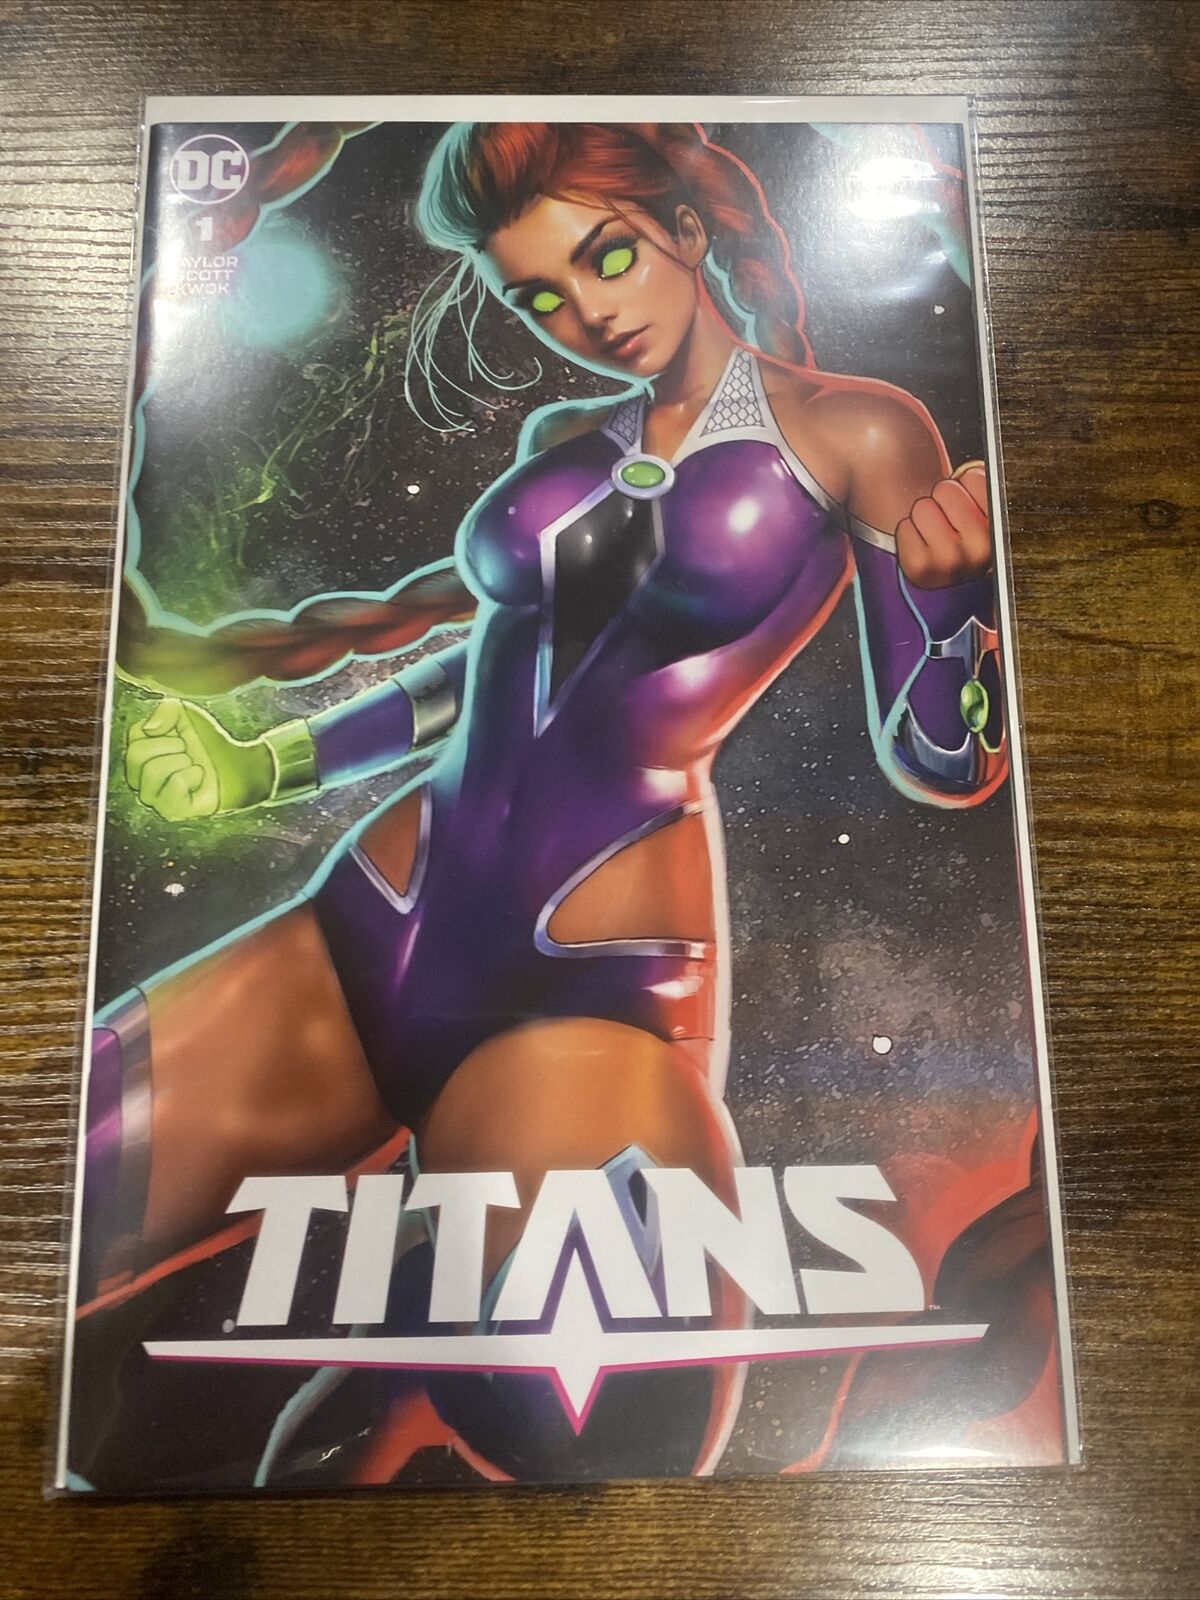 TITANS #1 * NM+ * NATHAN SZERDY EXCLUSIVE TRADE VARIANT STARFIRE TEEN 🔥🔥🔥